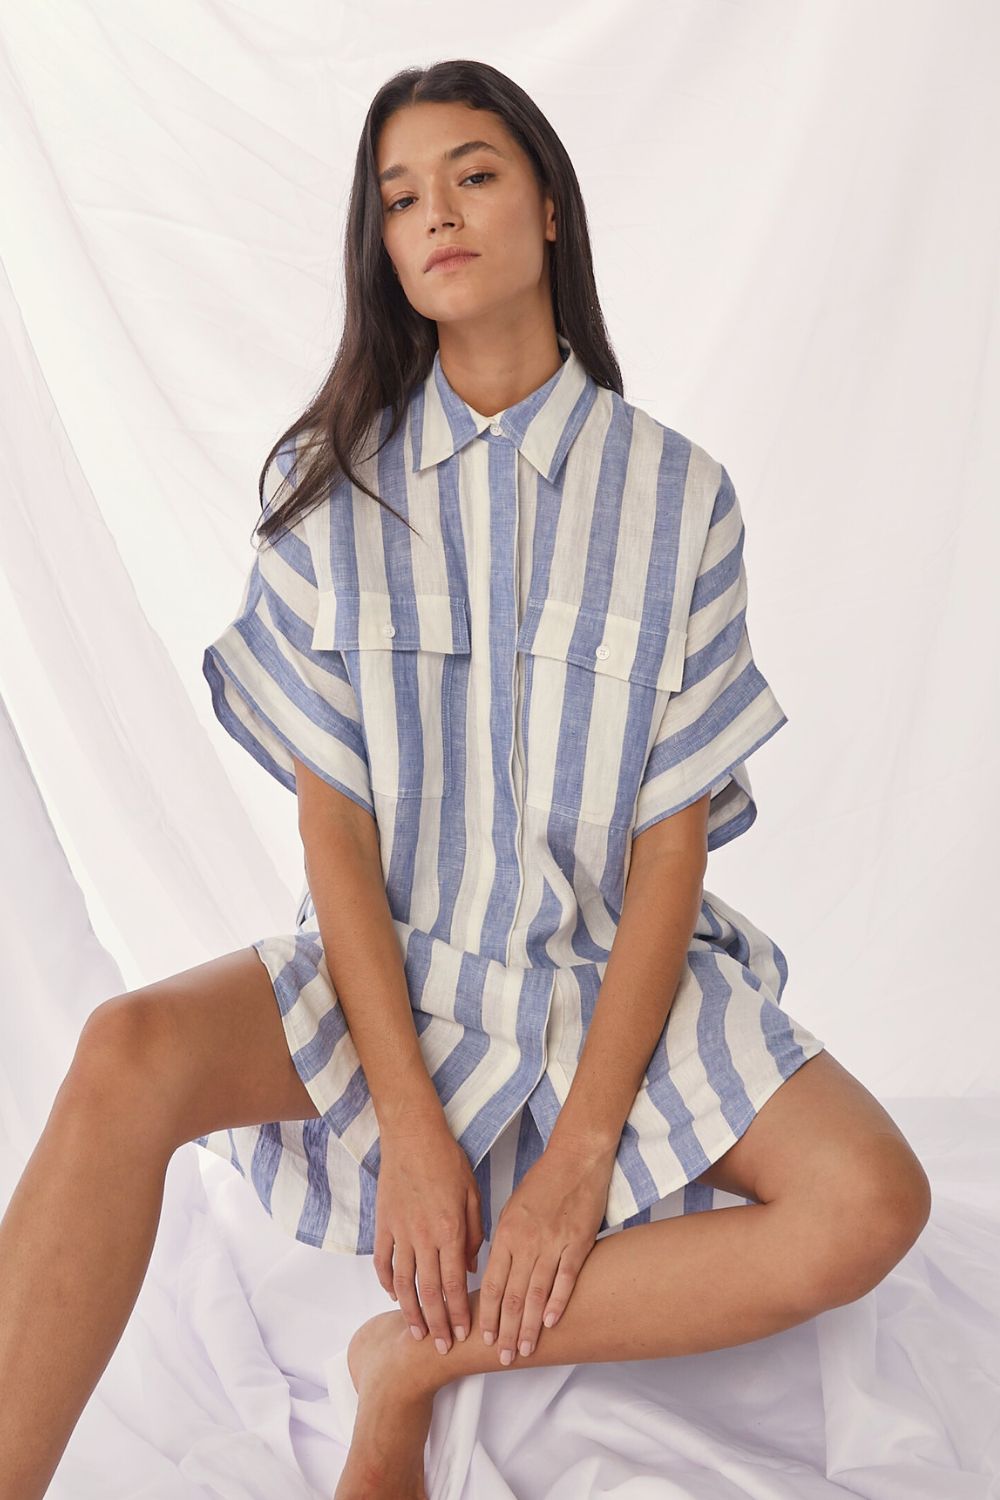 blue and white stripe, dress, mid length sleeves, oversized pockets, button down, collared dress, front image